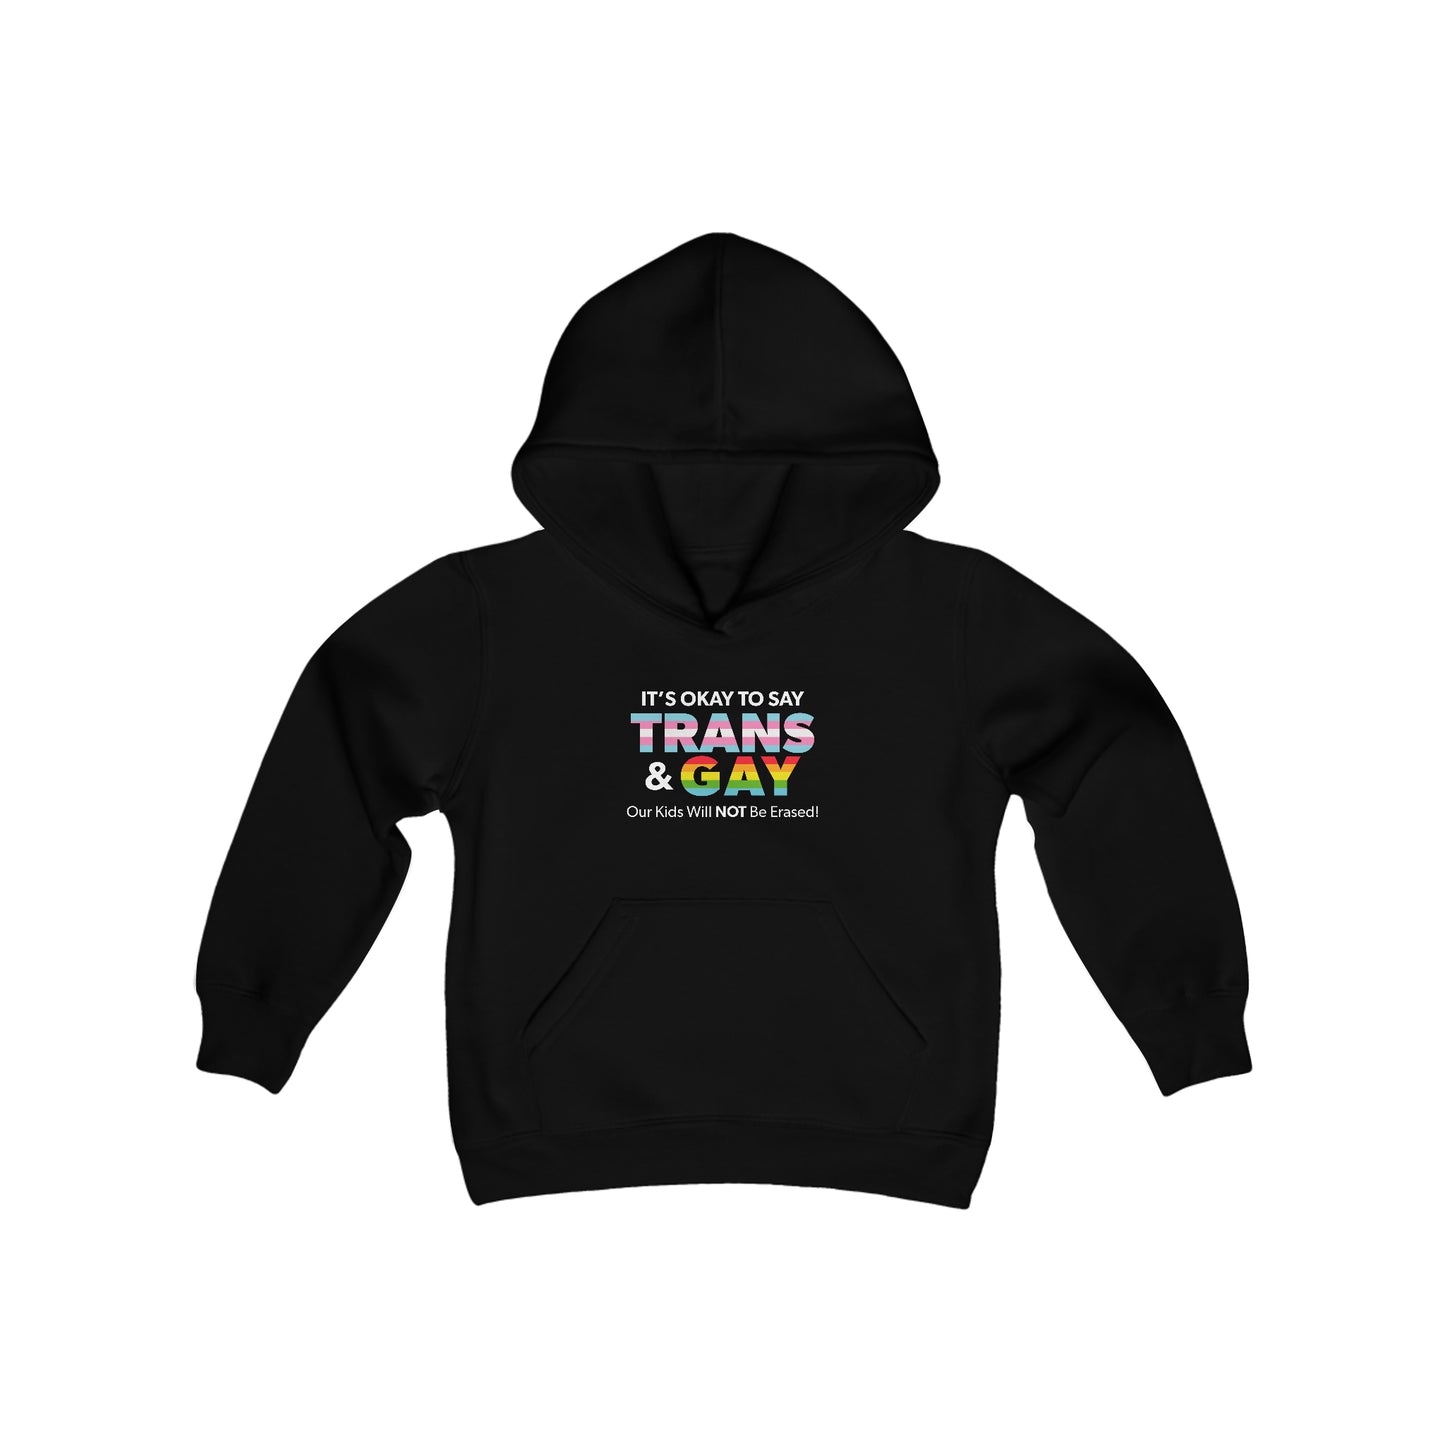 “It’s Okay to Say Trans & Gay” Youth Hoodie